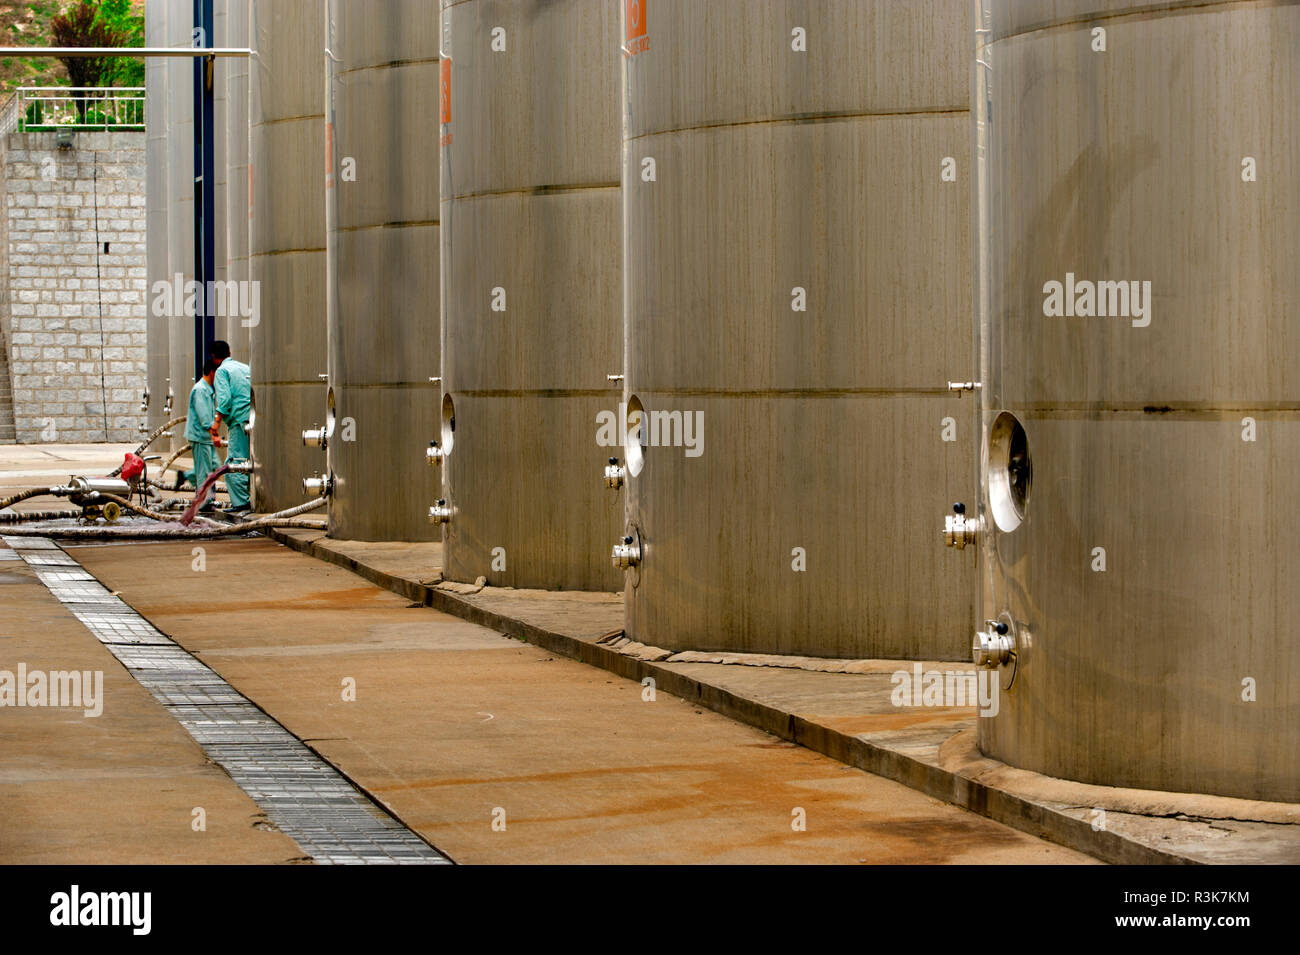 China, Shandong Province. Large stainless steel fermentation tanks holding 210 tons of juice at Changyu winery. Stock Photo